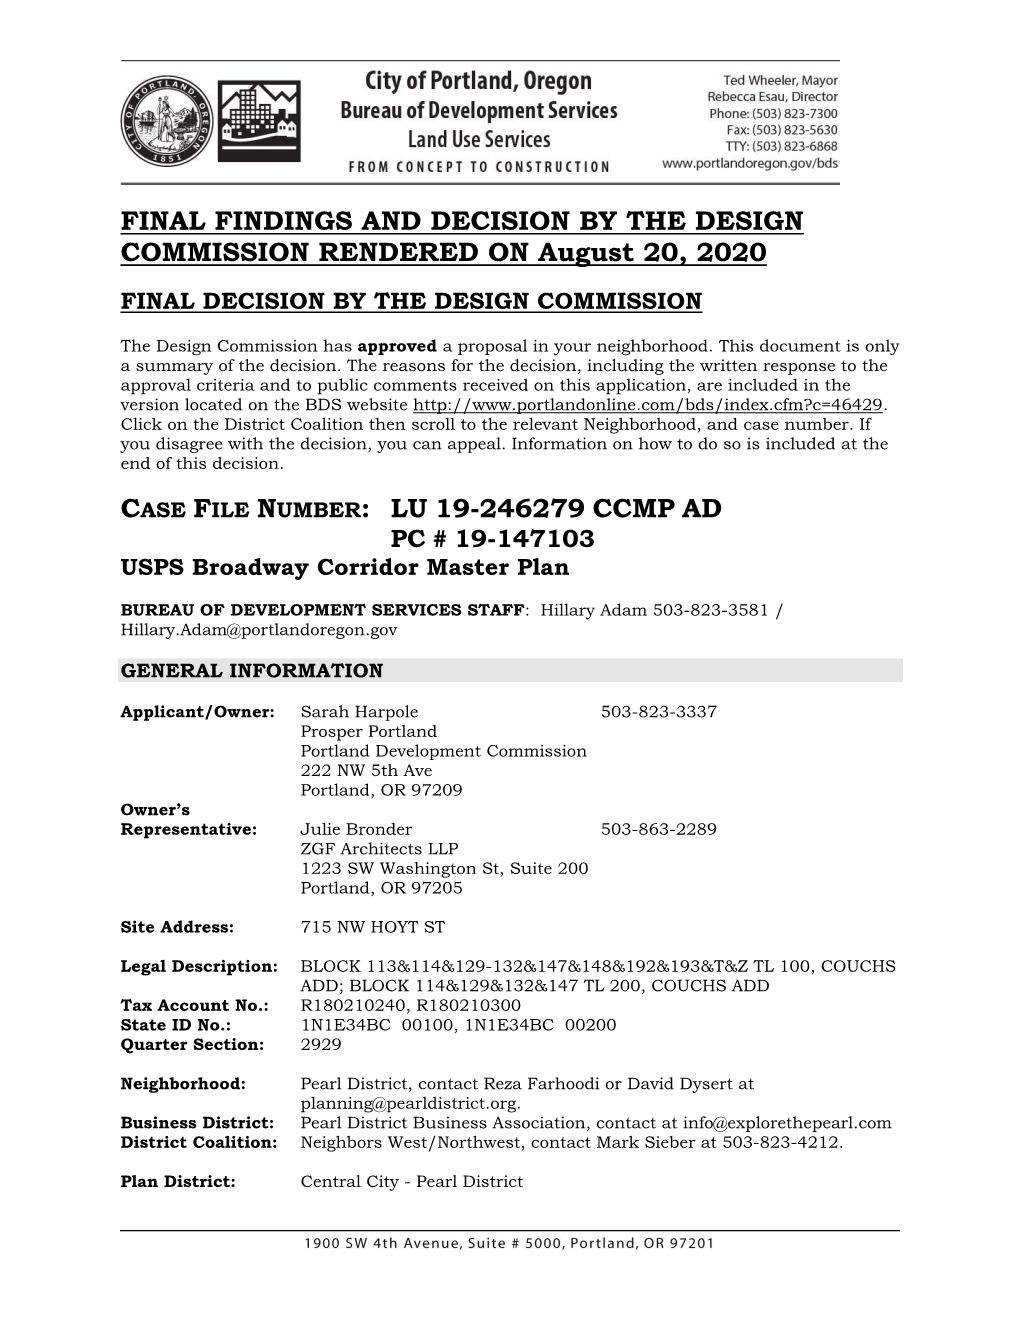 FINAL FINDINGS and DECISION by the DESIGN COMMISSION RENDERED on August 20, 2020